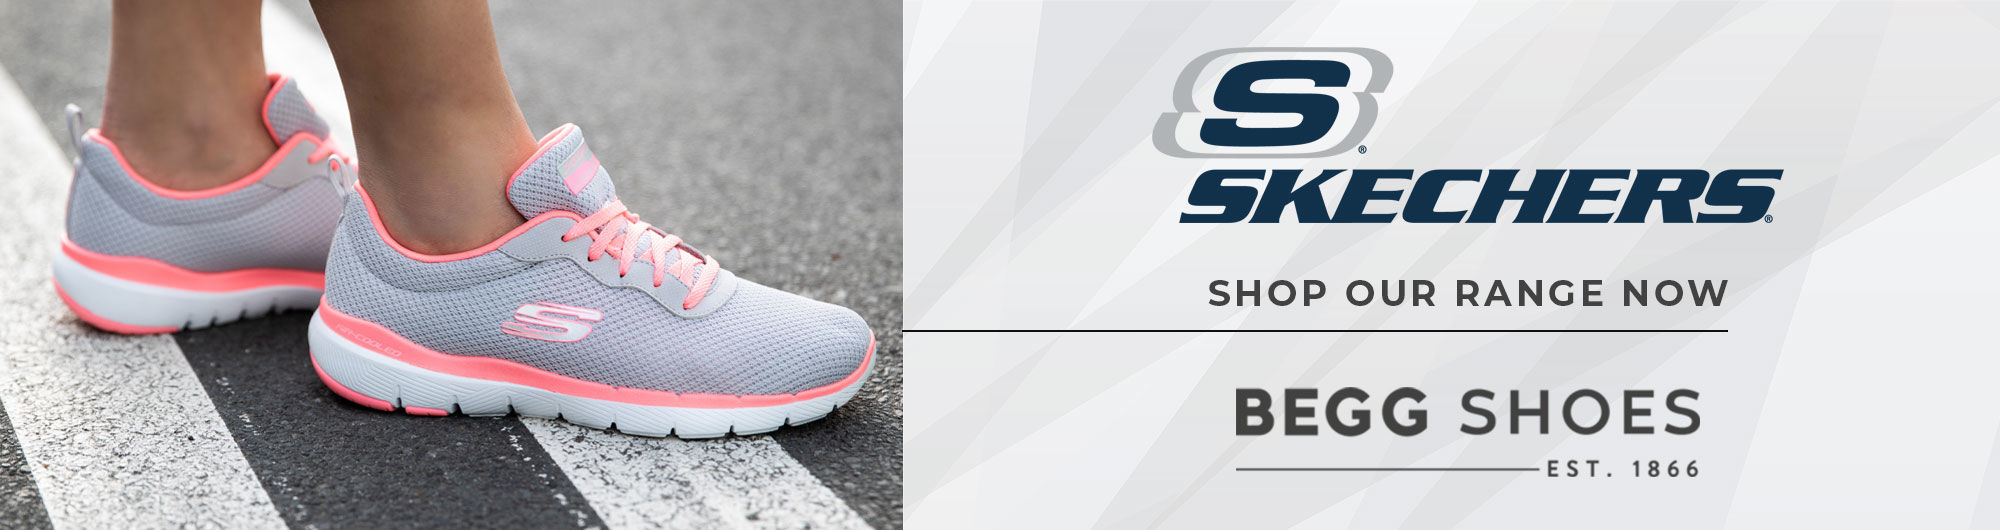 Skechers Trainers, Boots & Official Stockists